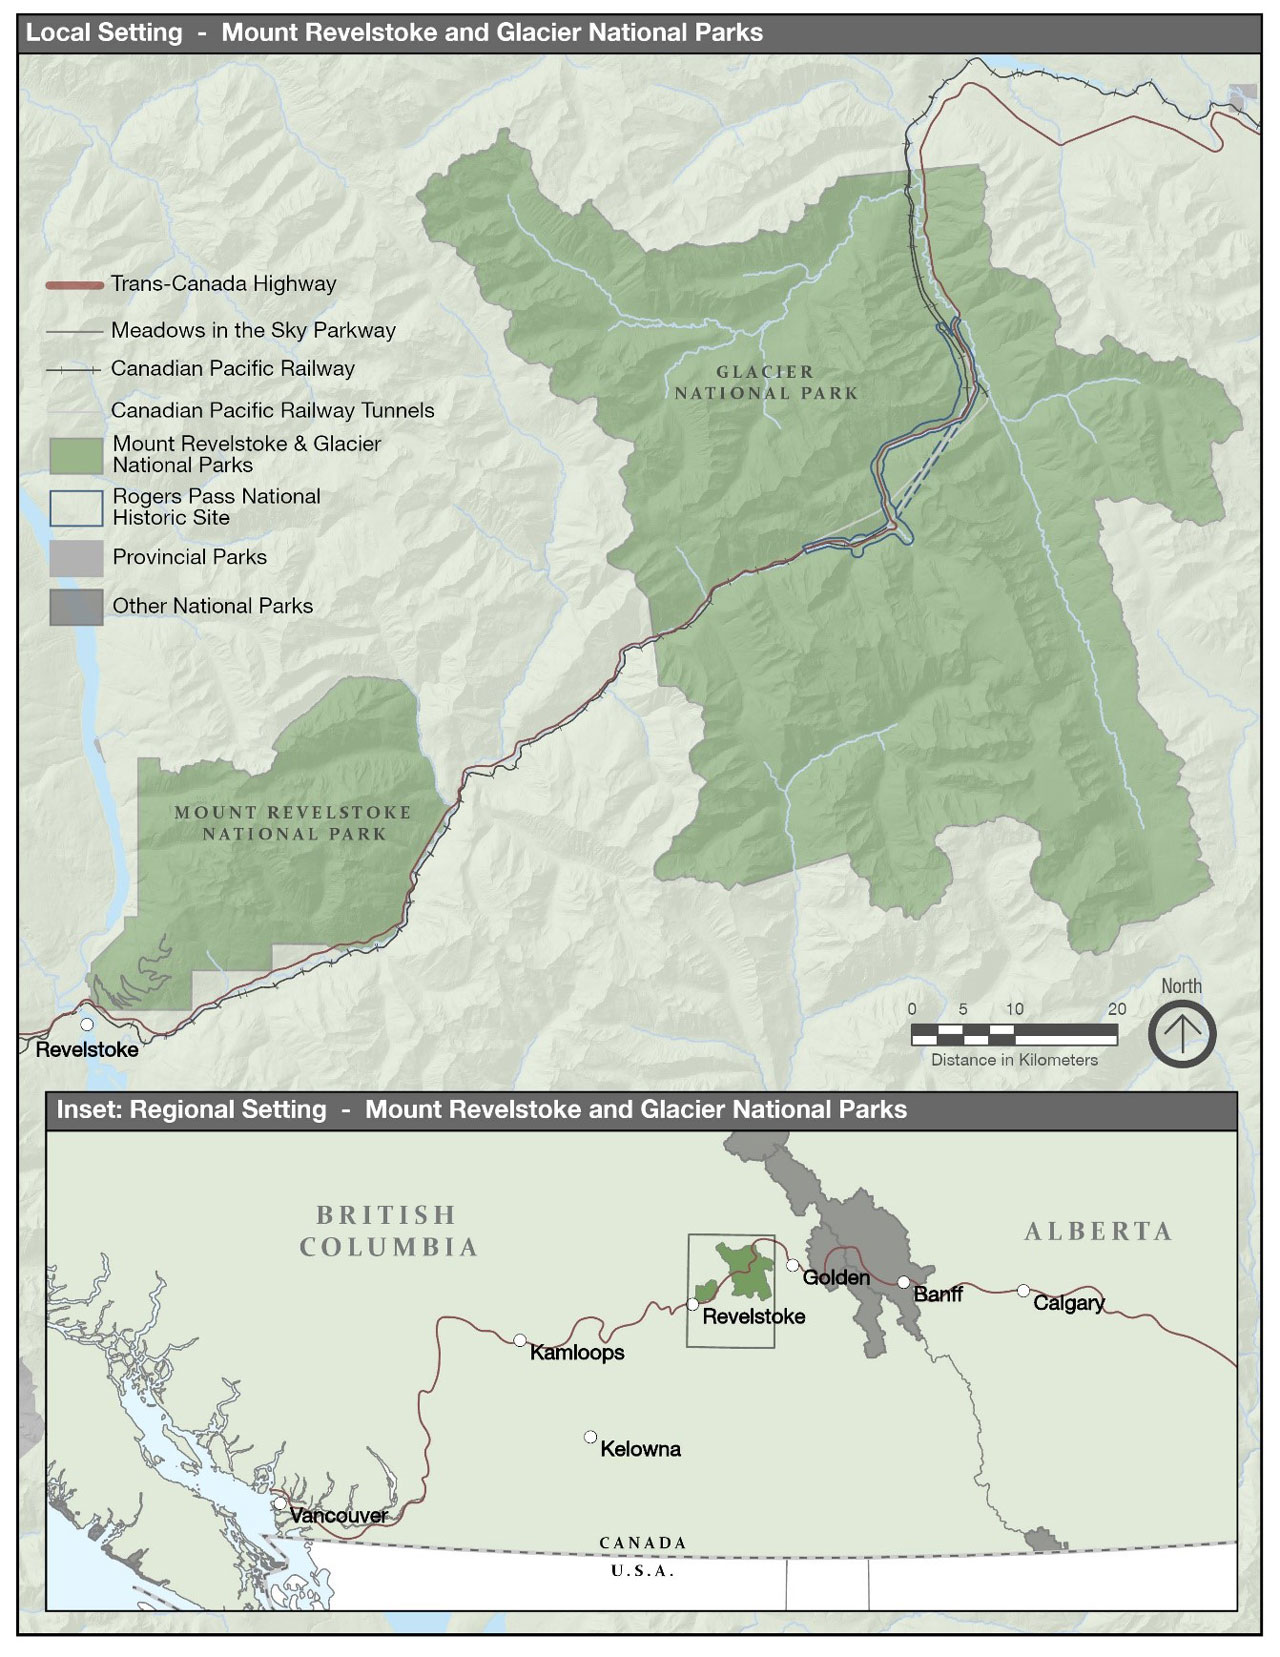 A map showing the location of Mount Revelstoke and Glacier national parks and Rogers Pass National Historic Site in British Columbia.